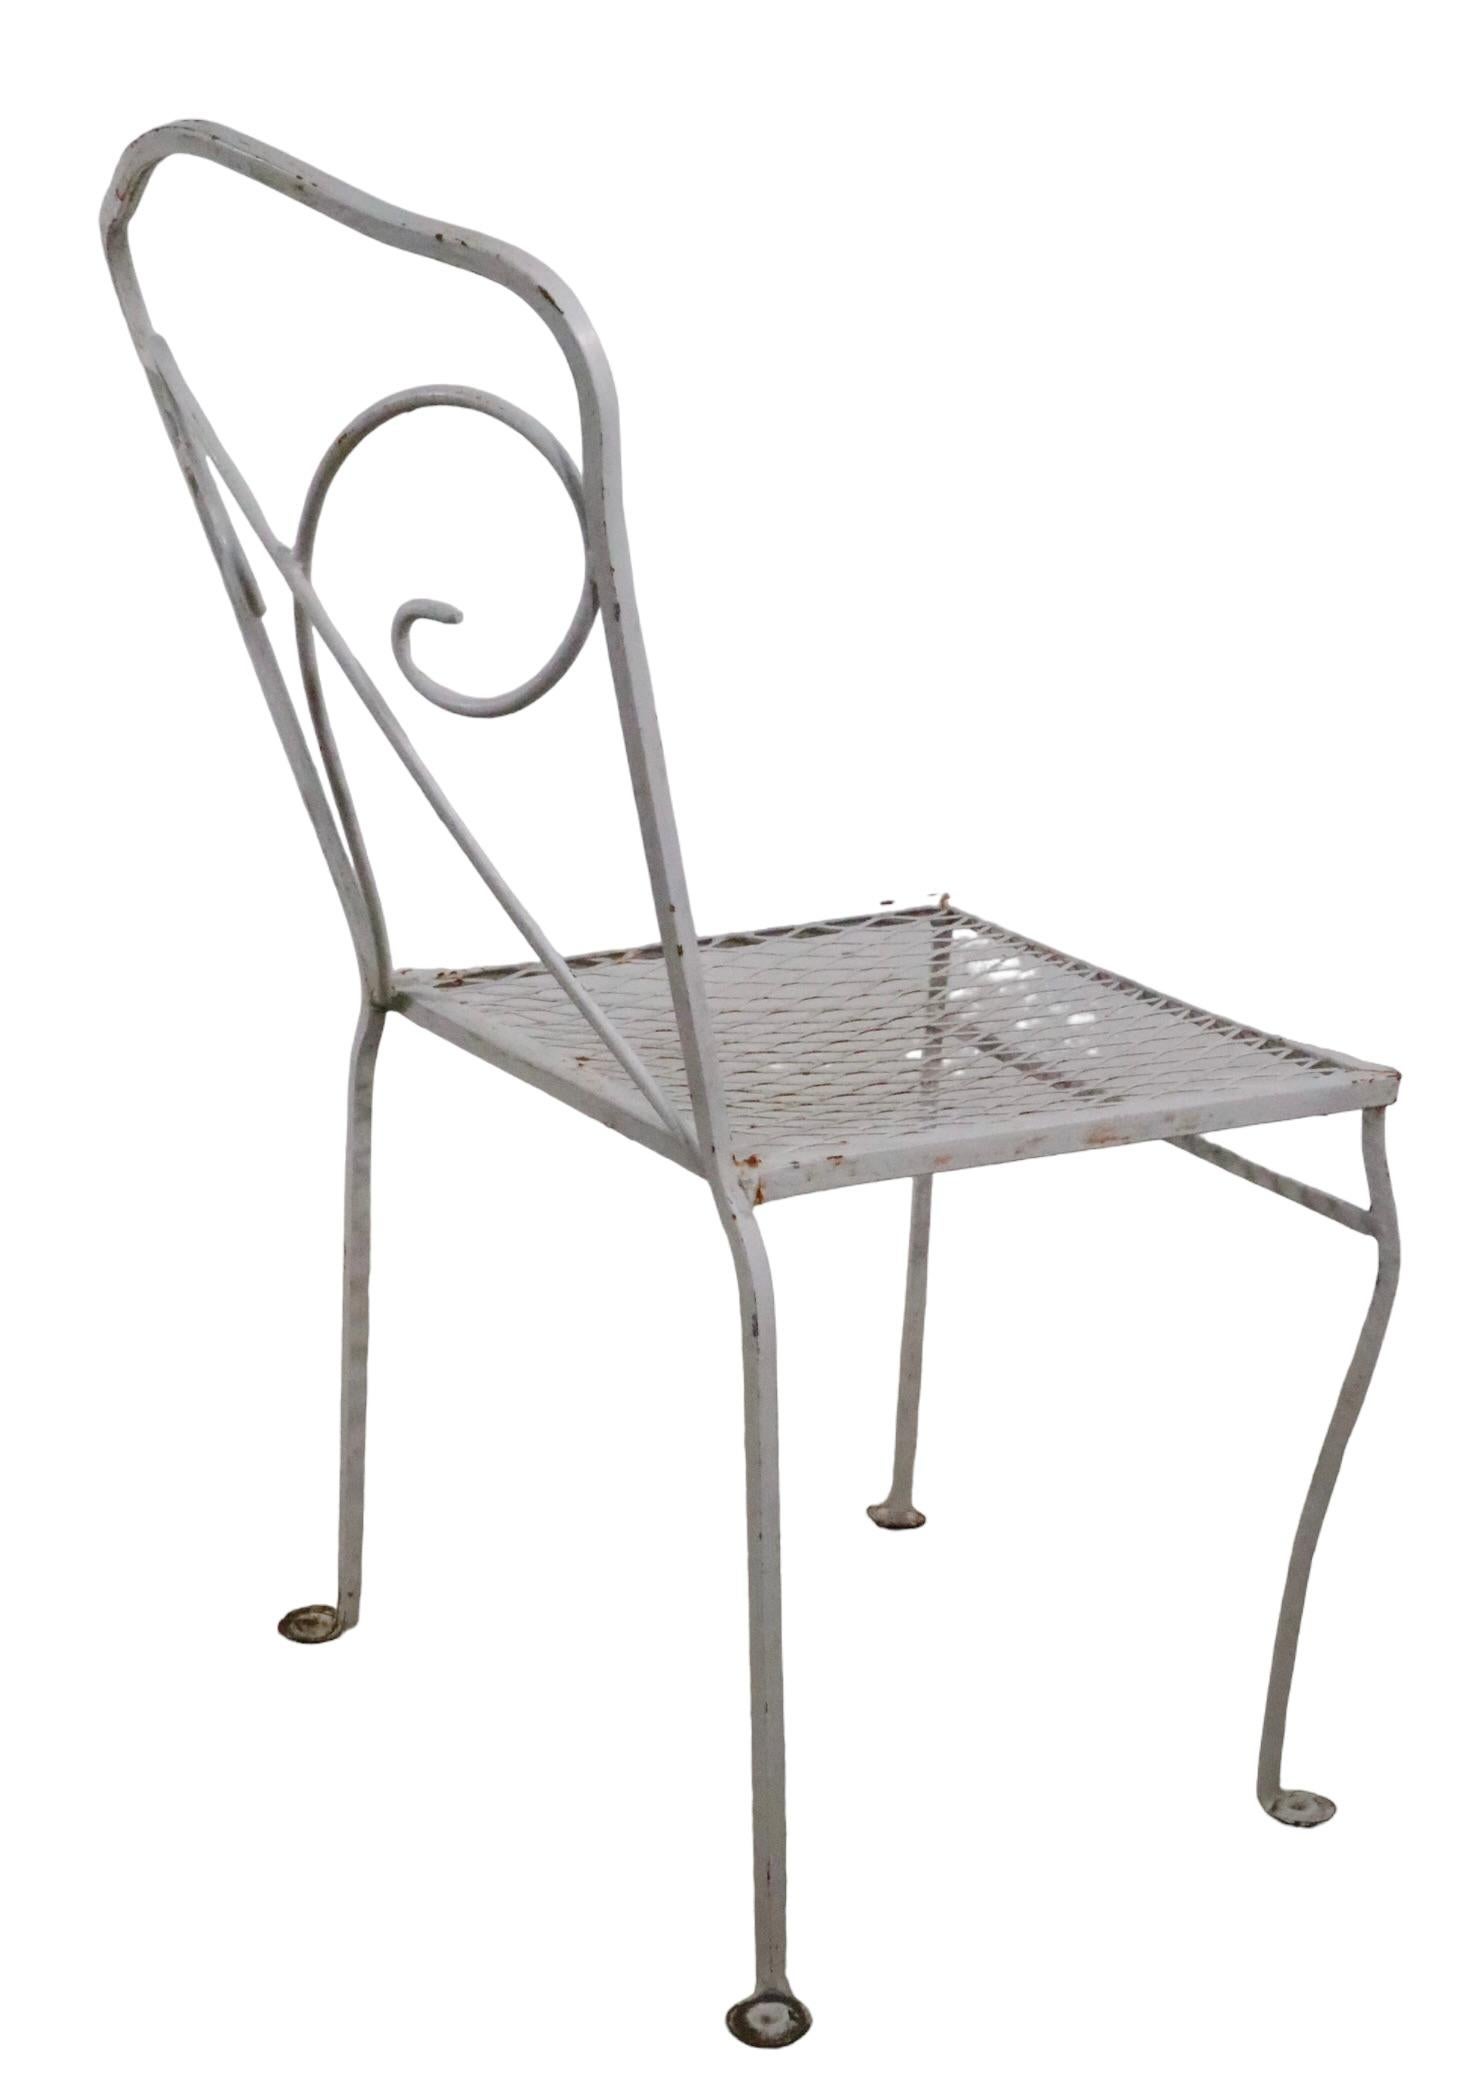 American Set of Four Wrought Iron Garden Patio Chairs Possibly by Woodard c 1950/1970s  For Sale